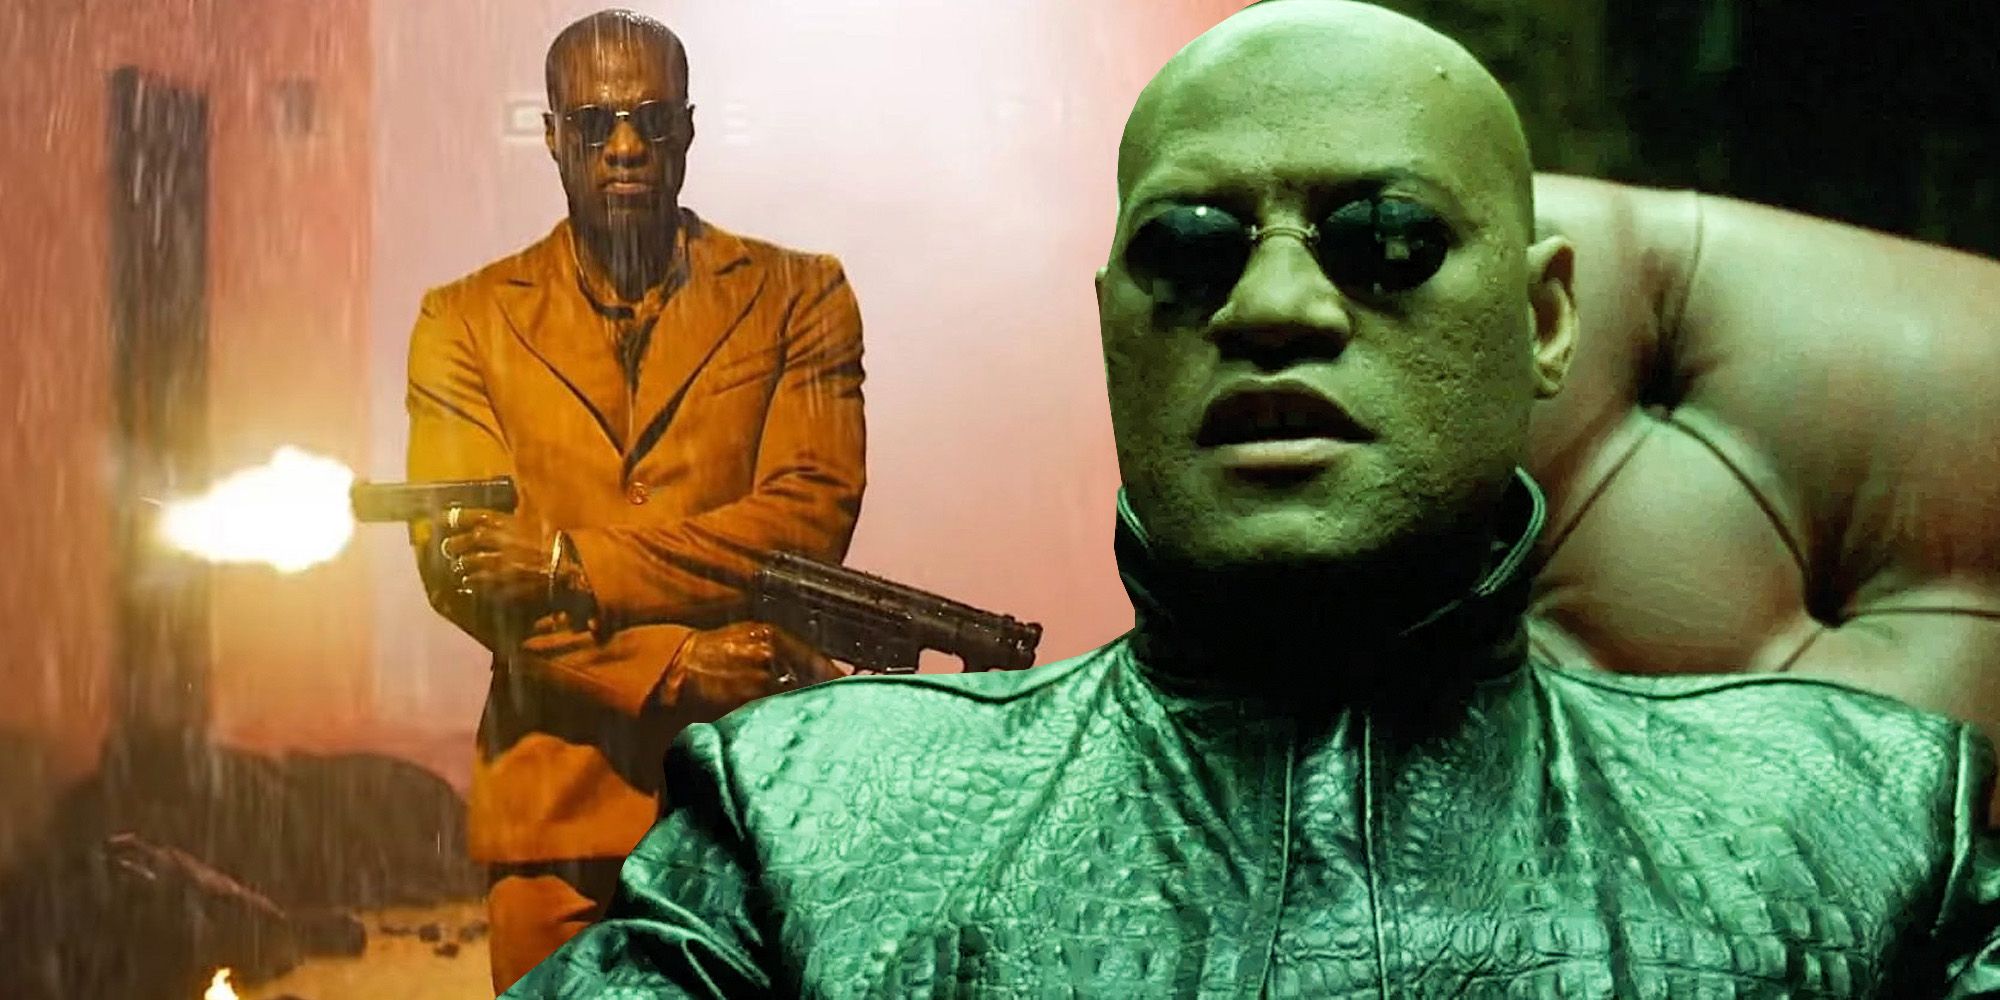 Old and New Morpheus in Matrix